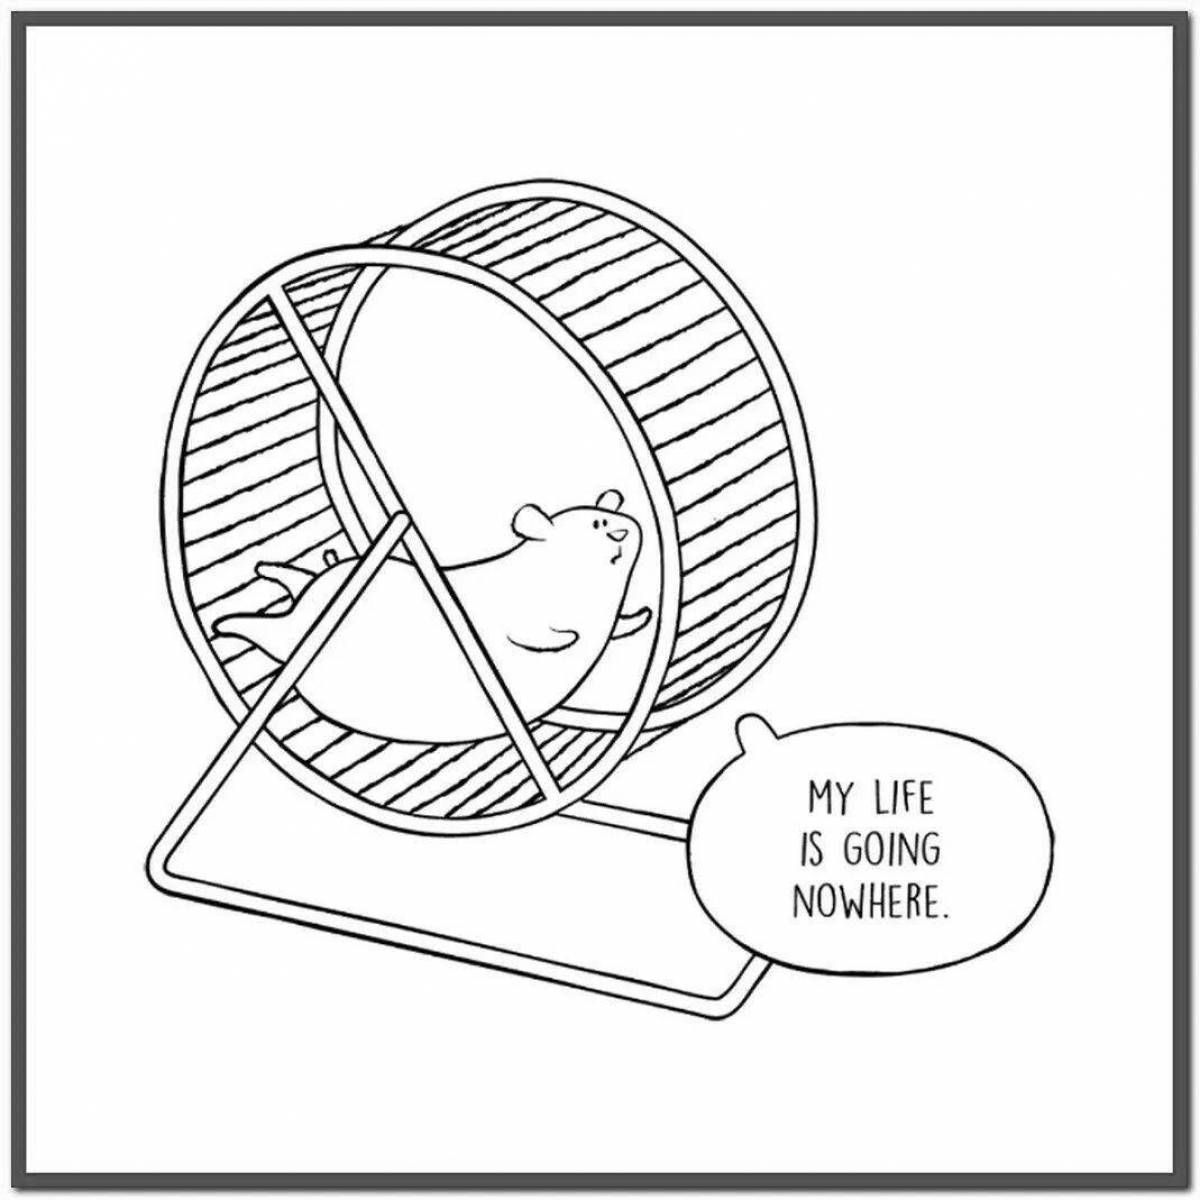 Coloring page busy hamster in a cage